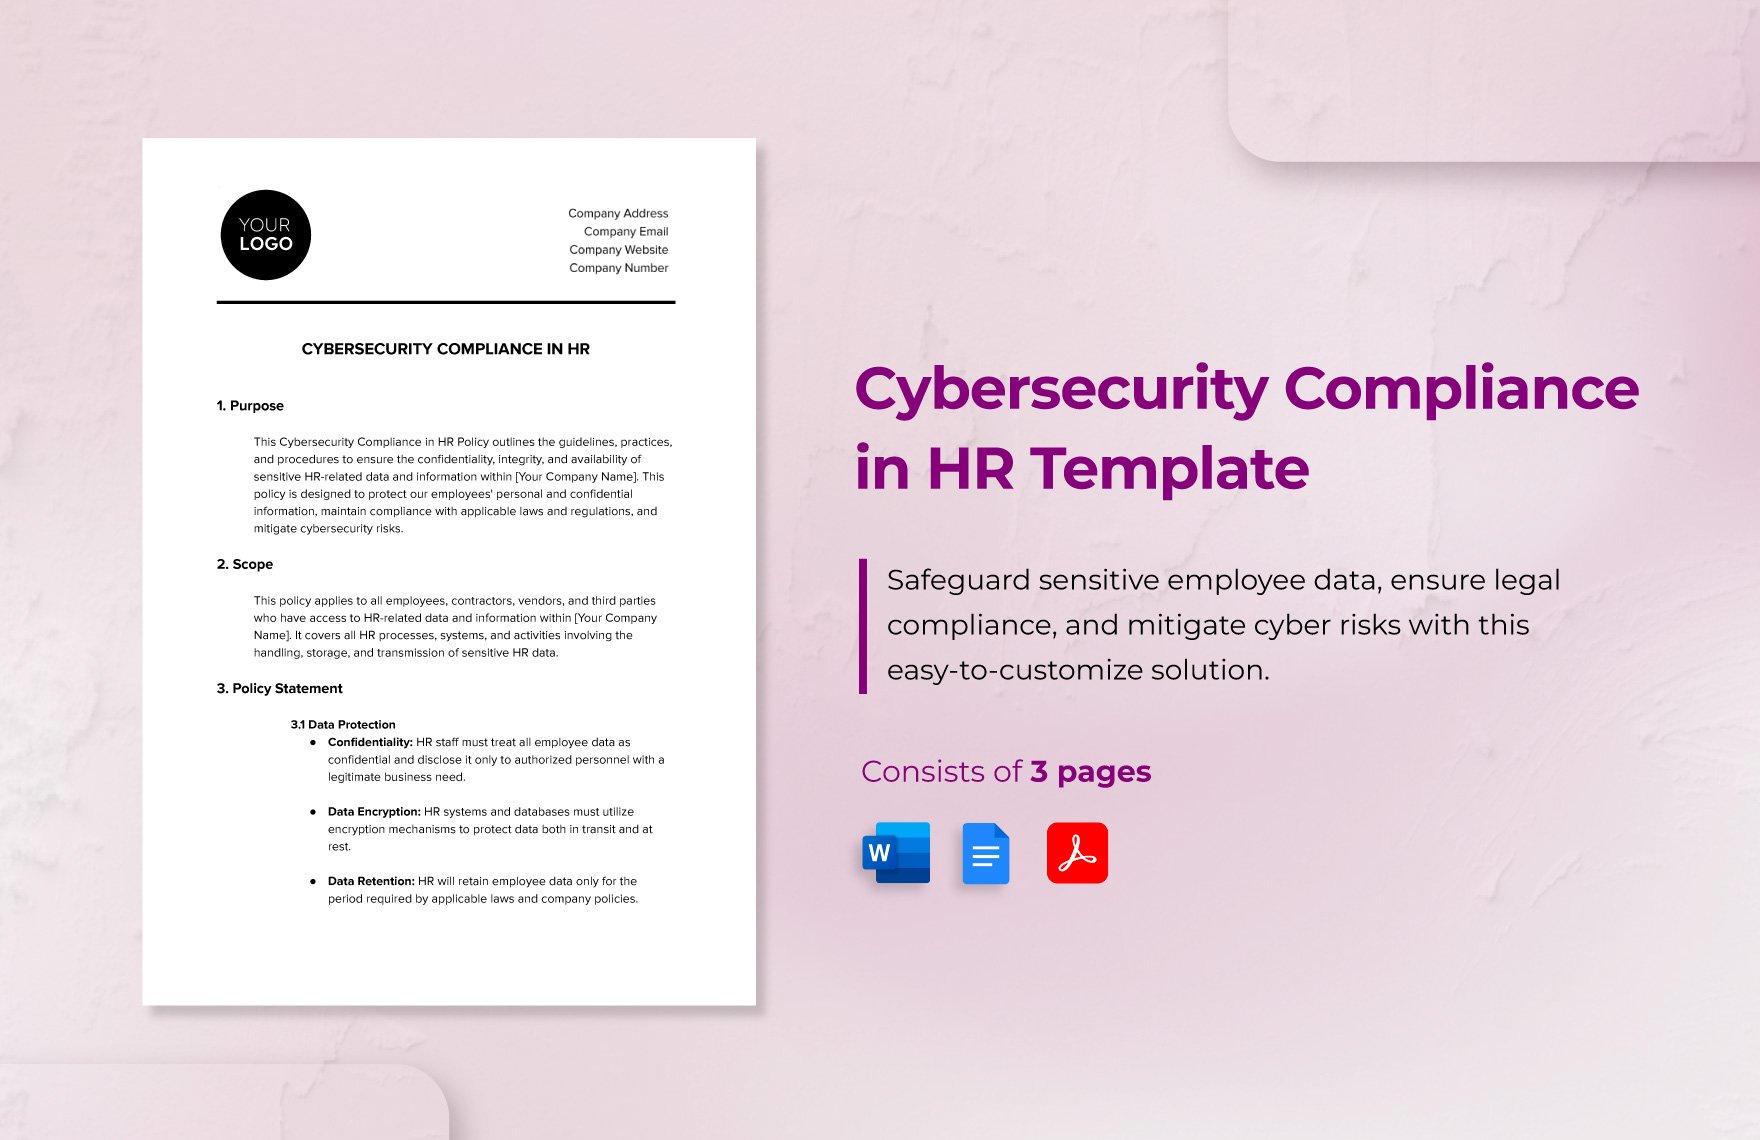 Cybersecurity Compliance in HR Template